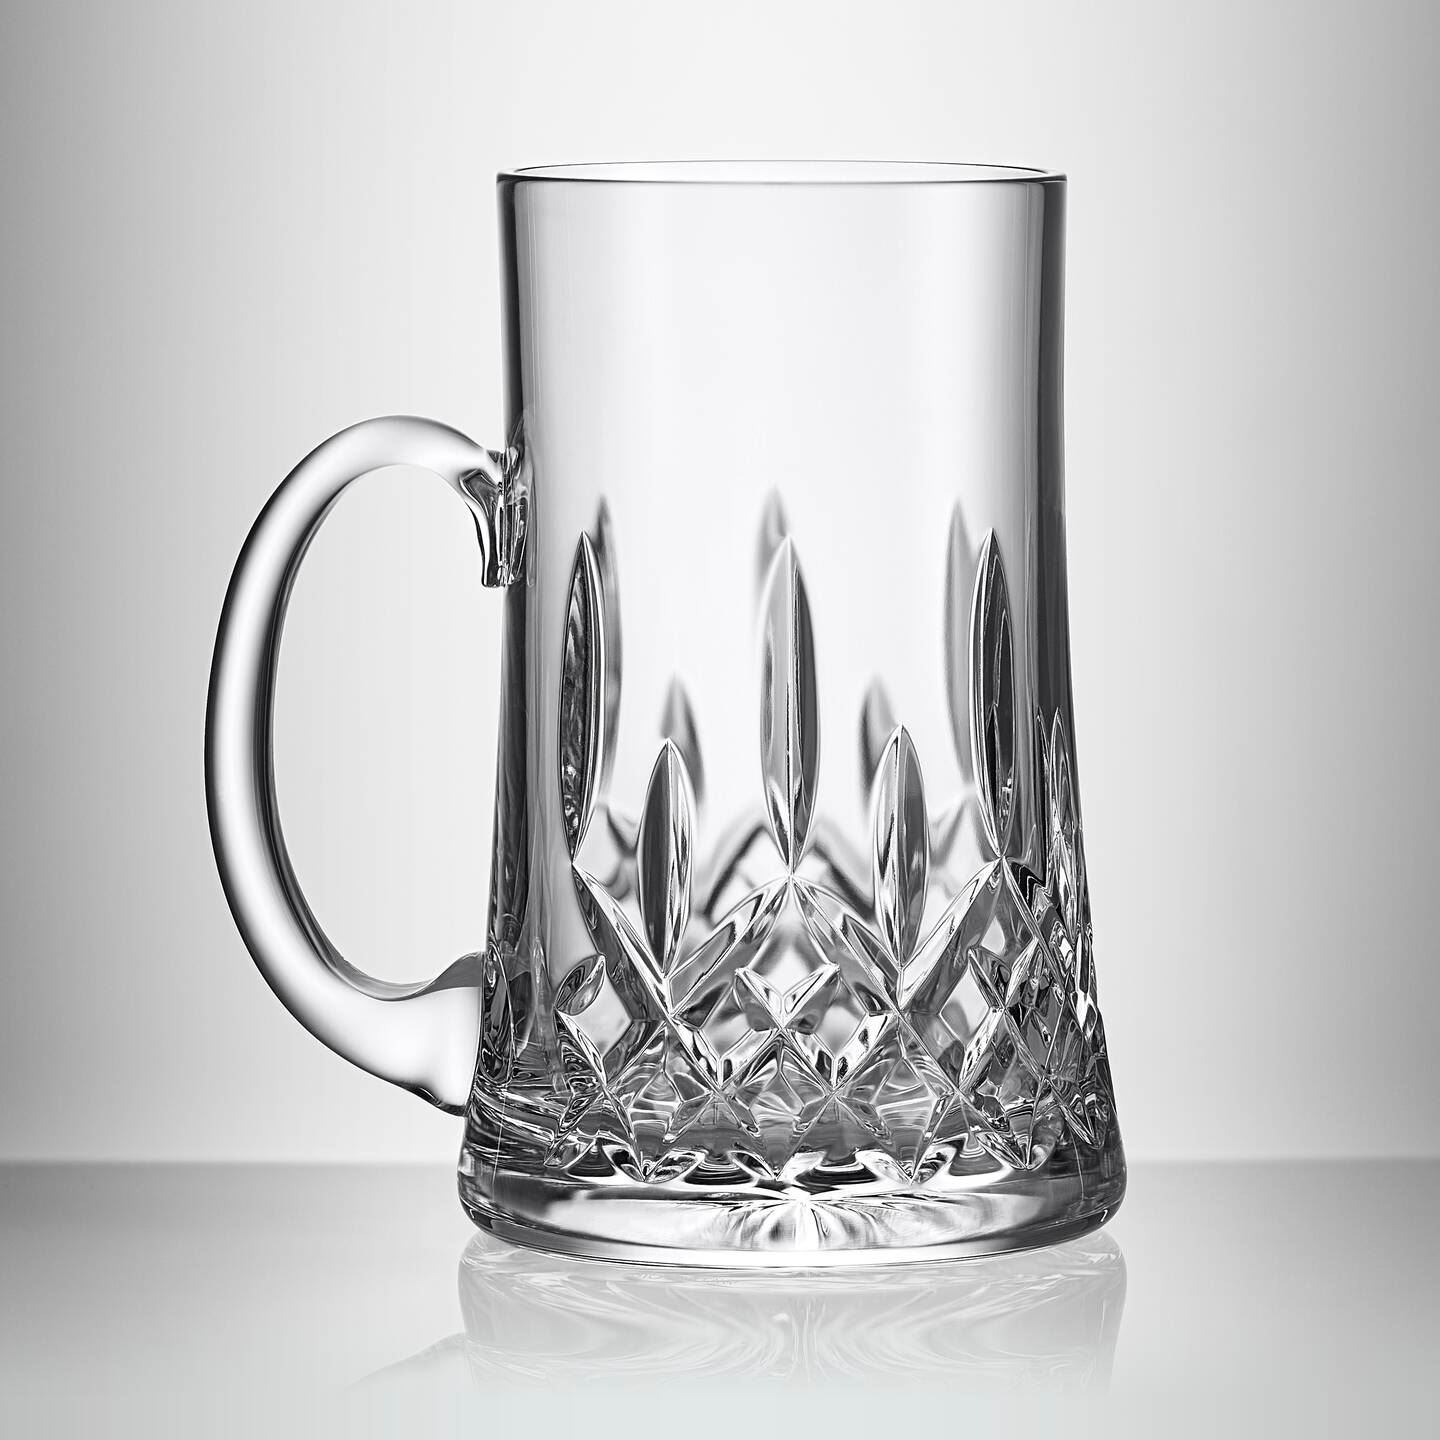 Personalized Beer Mugs for the Best Man and Groomsmen - Crystal